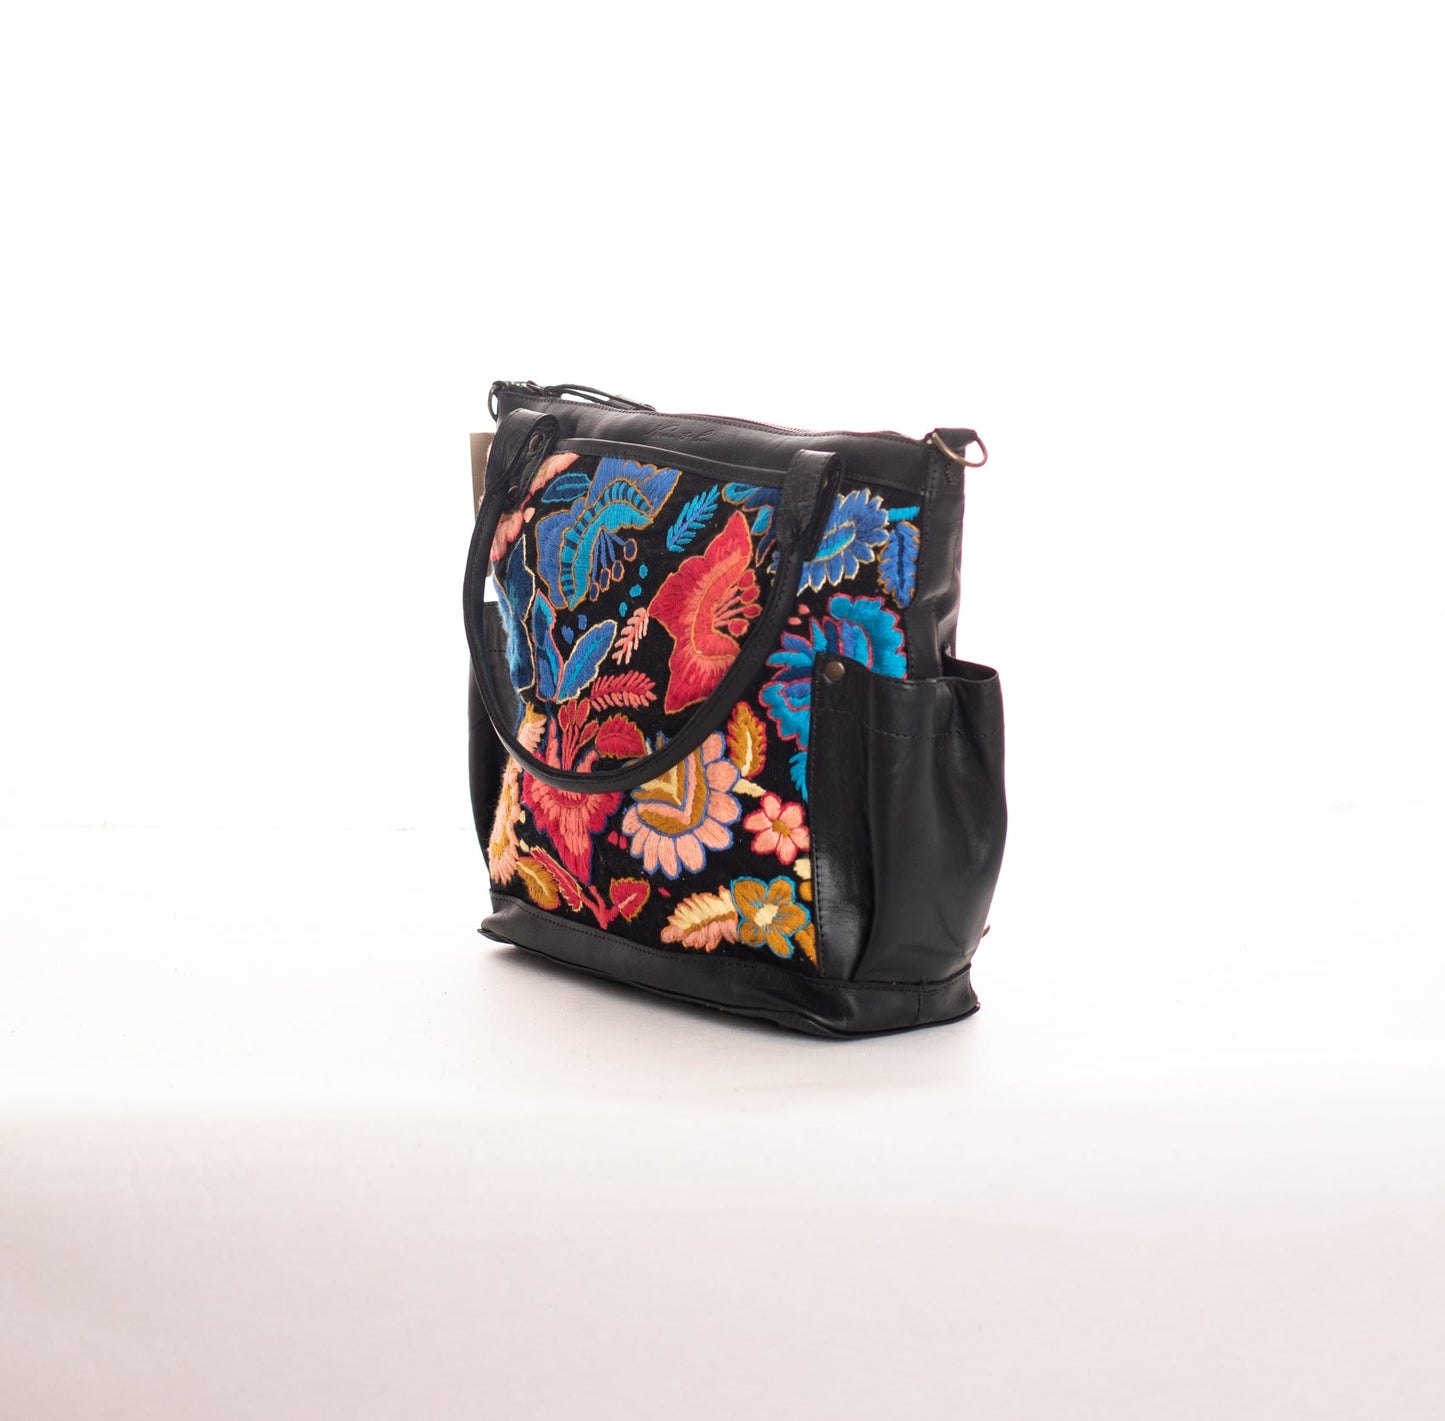 THE MEDIUM PERFECT BAG 2.0 - EMBROIDERED BLOOMS - BLACK - NO. 12618